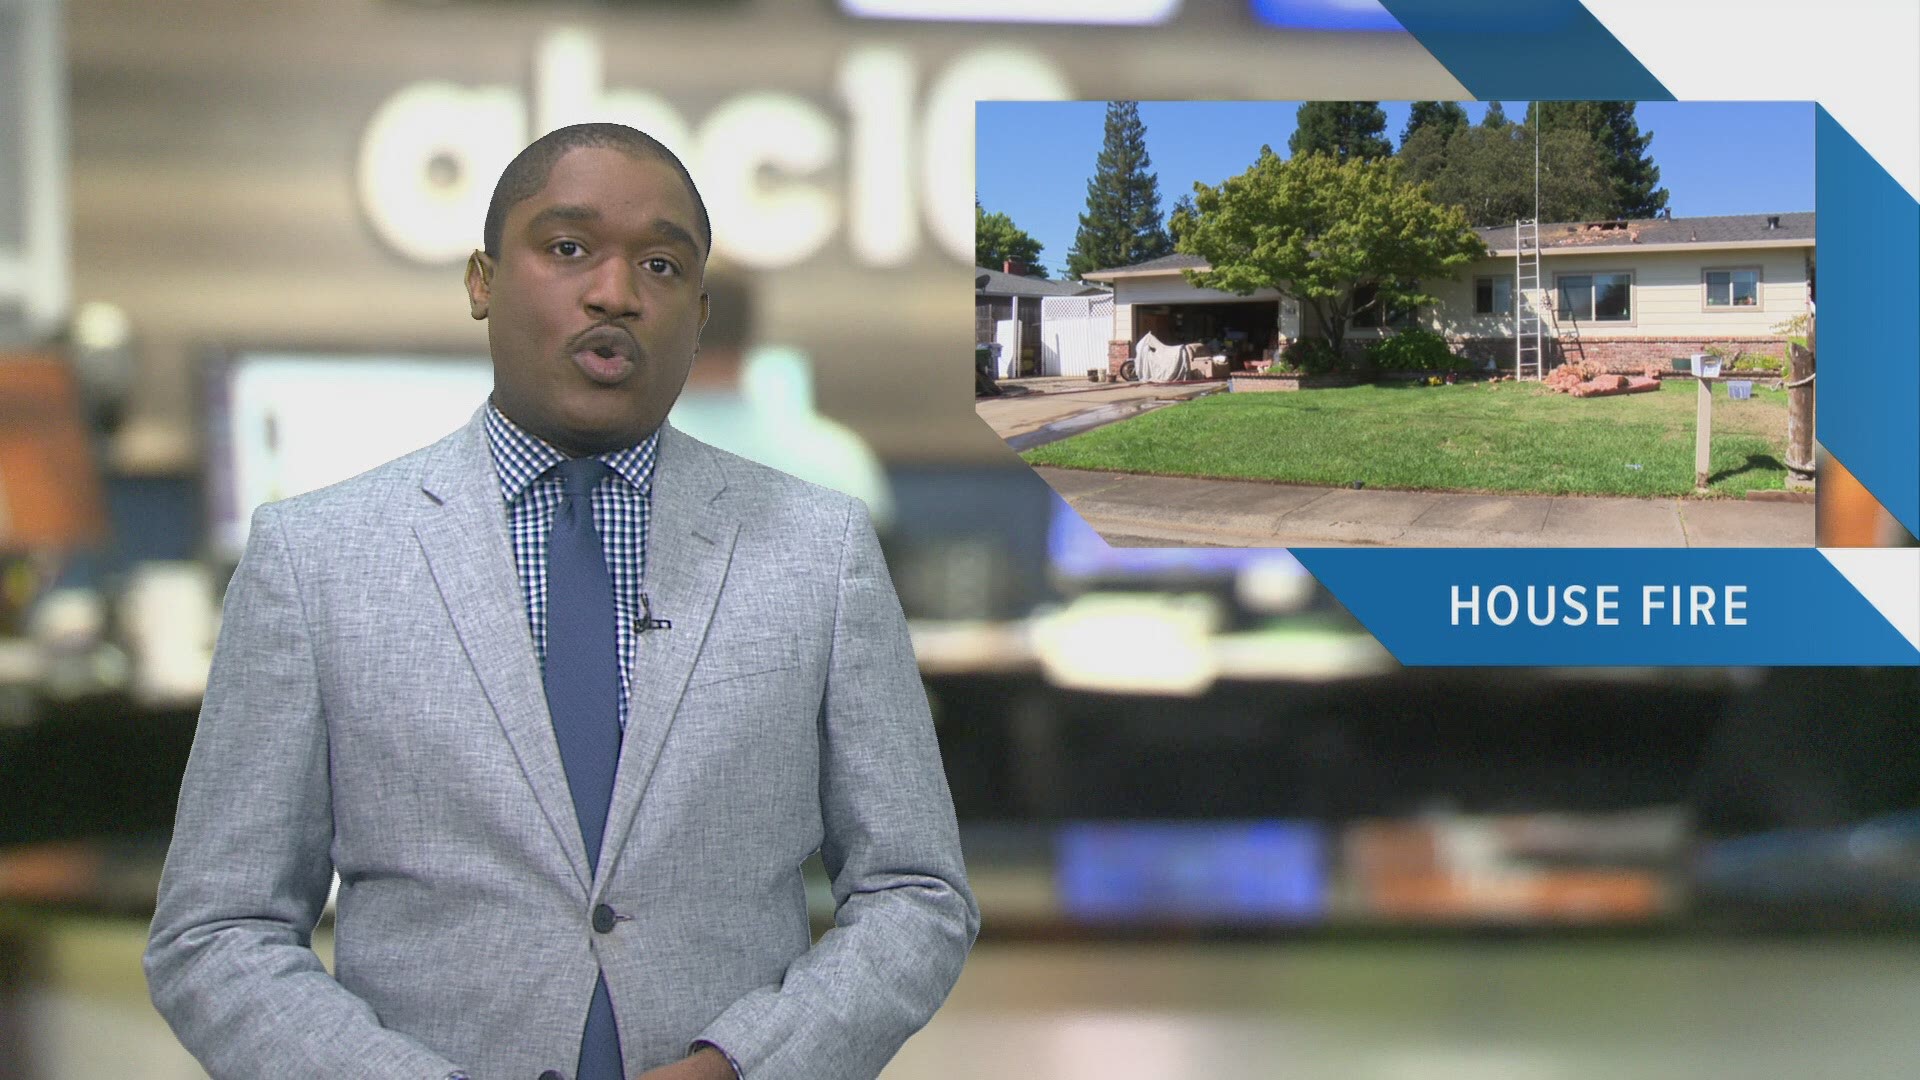 Evening Headlines: August 15, 2019 | Catch in-depth reporting on #LateNewsTonight at 11 p.m. | The latest Sacramento news is always at www.abc10.com.